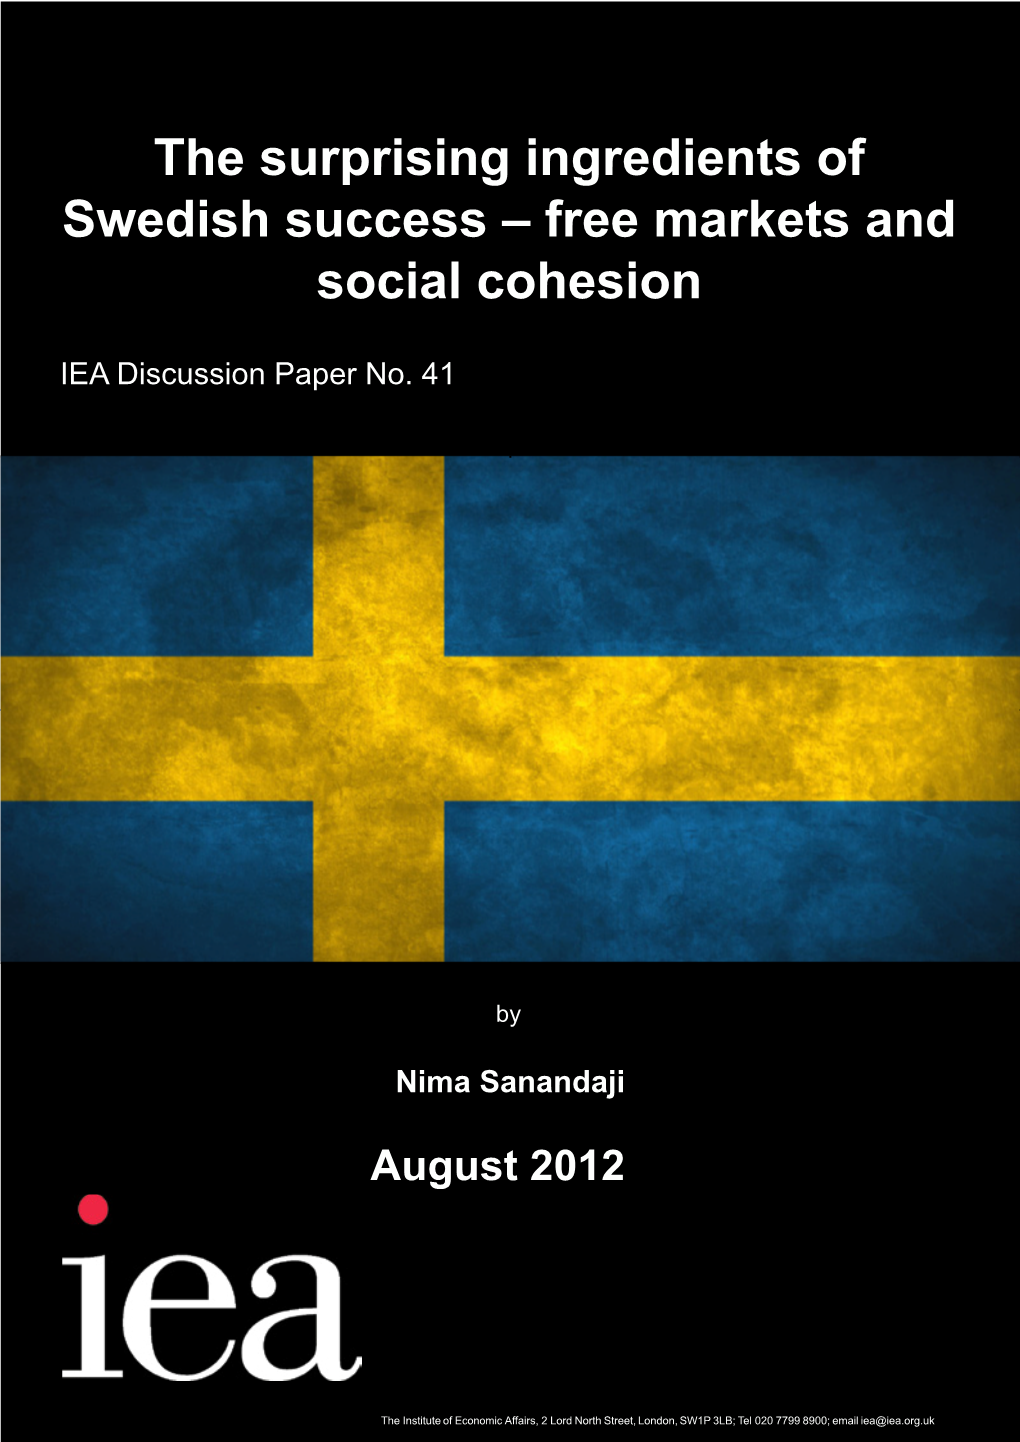 The Surprising Ingredients of Swedish Success – Free Markets and Social Cohesion